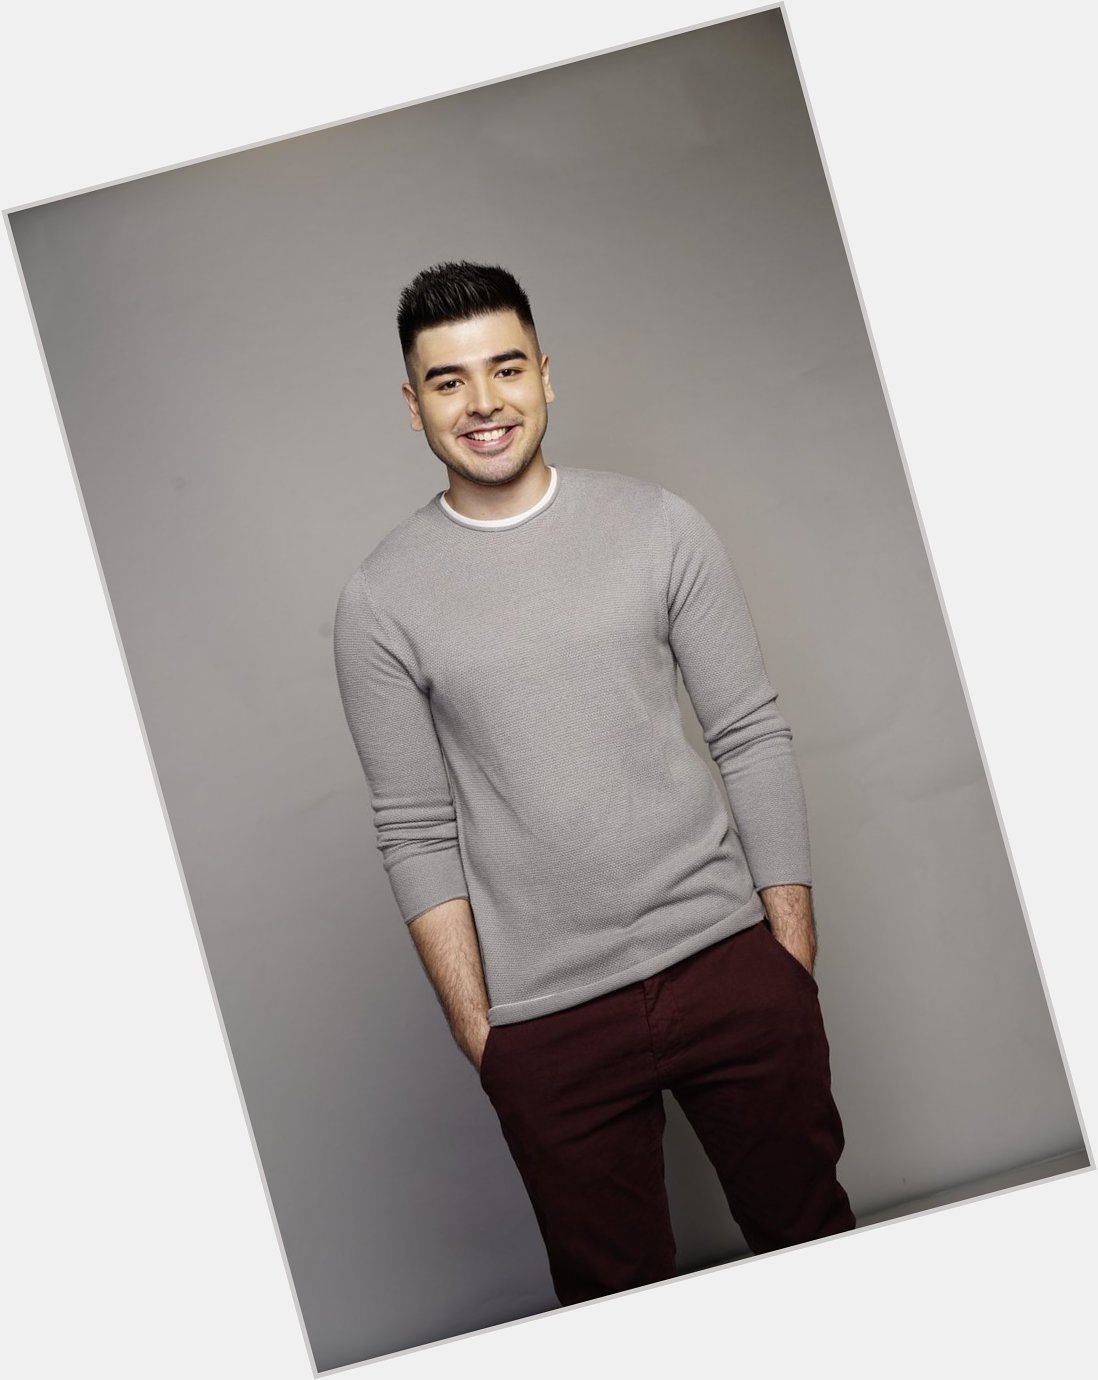 Happy Birthday, Andre Paras! We wish you all the best in life!   